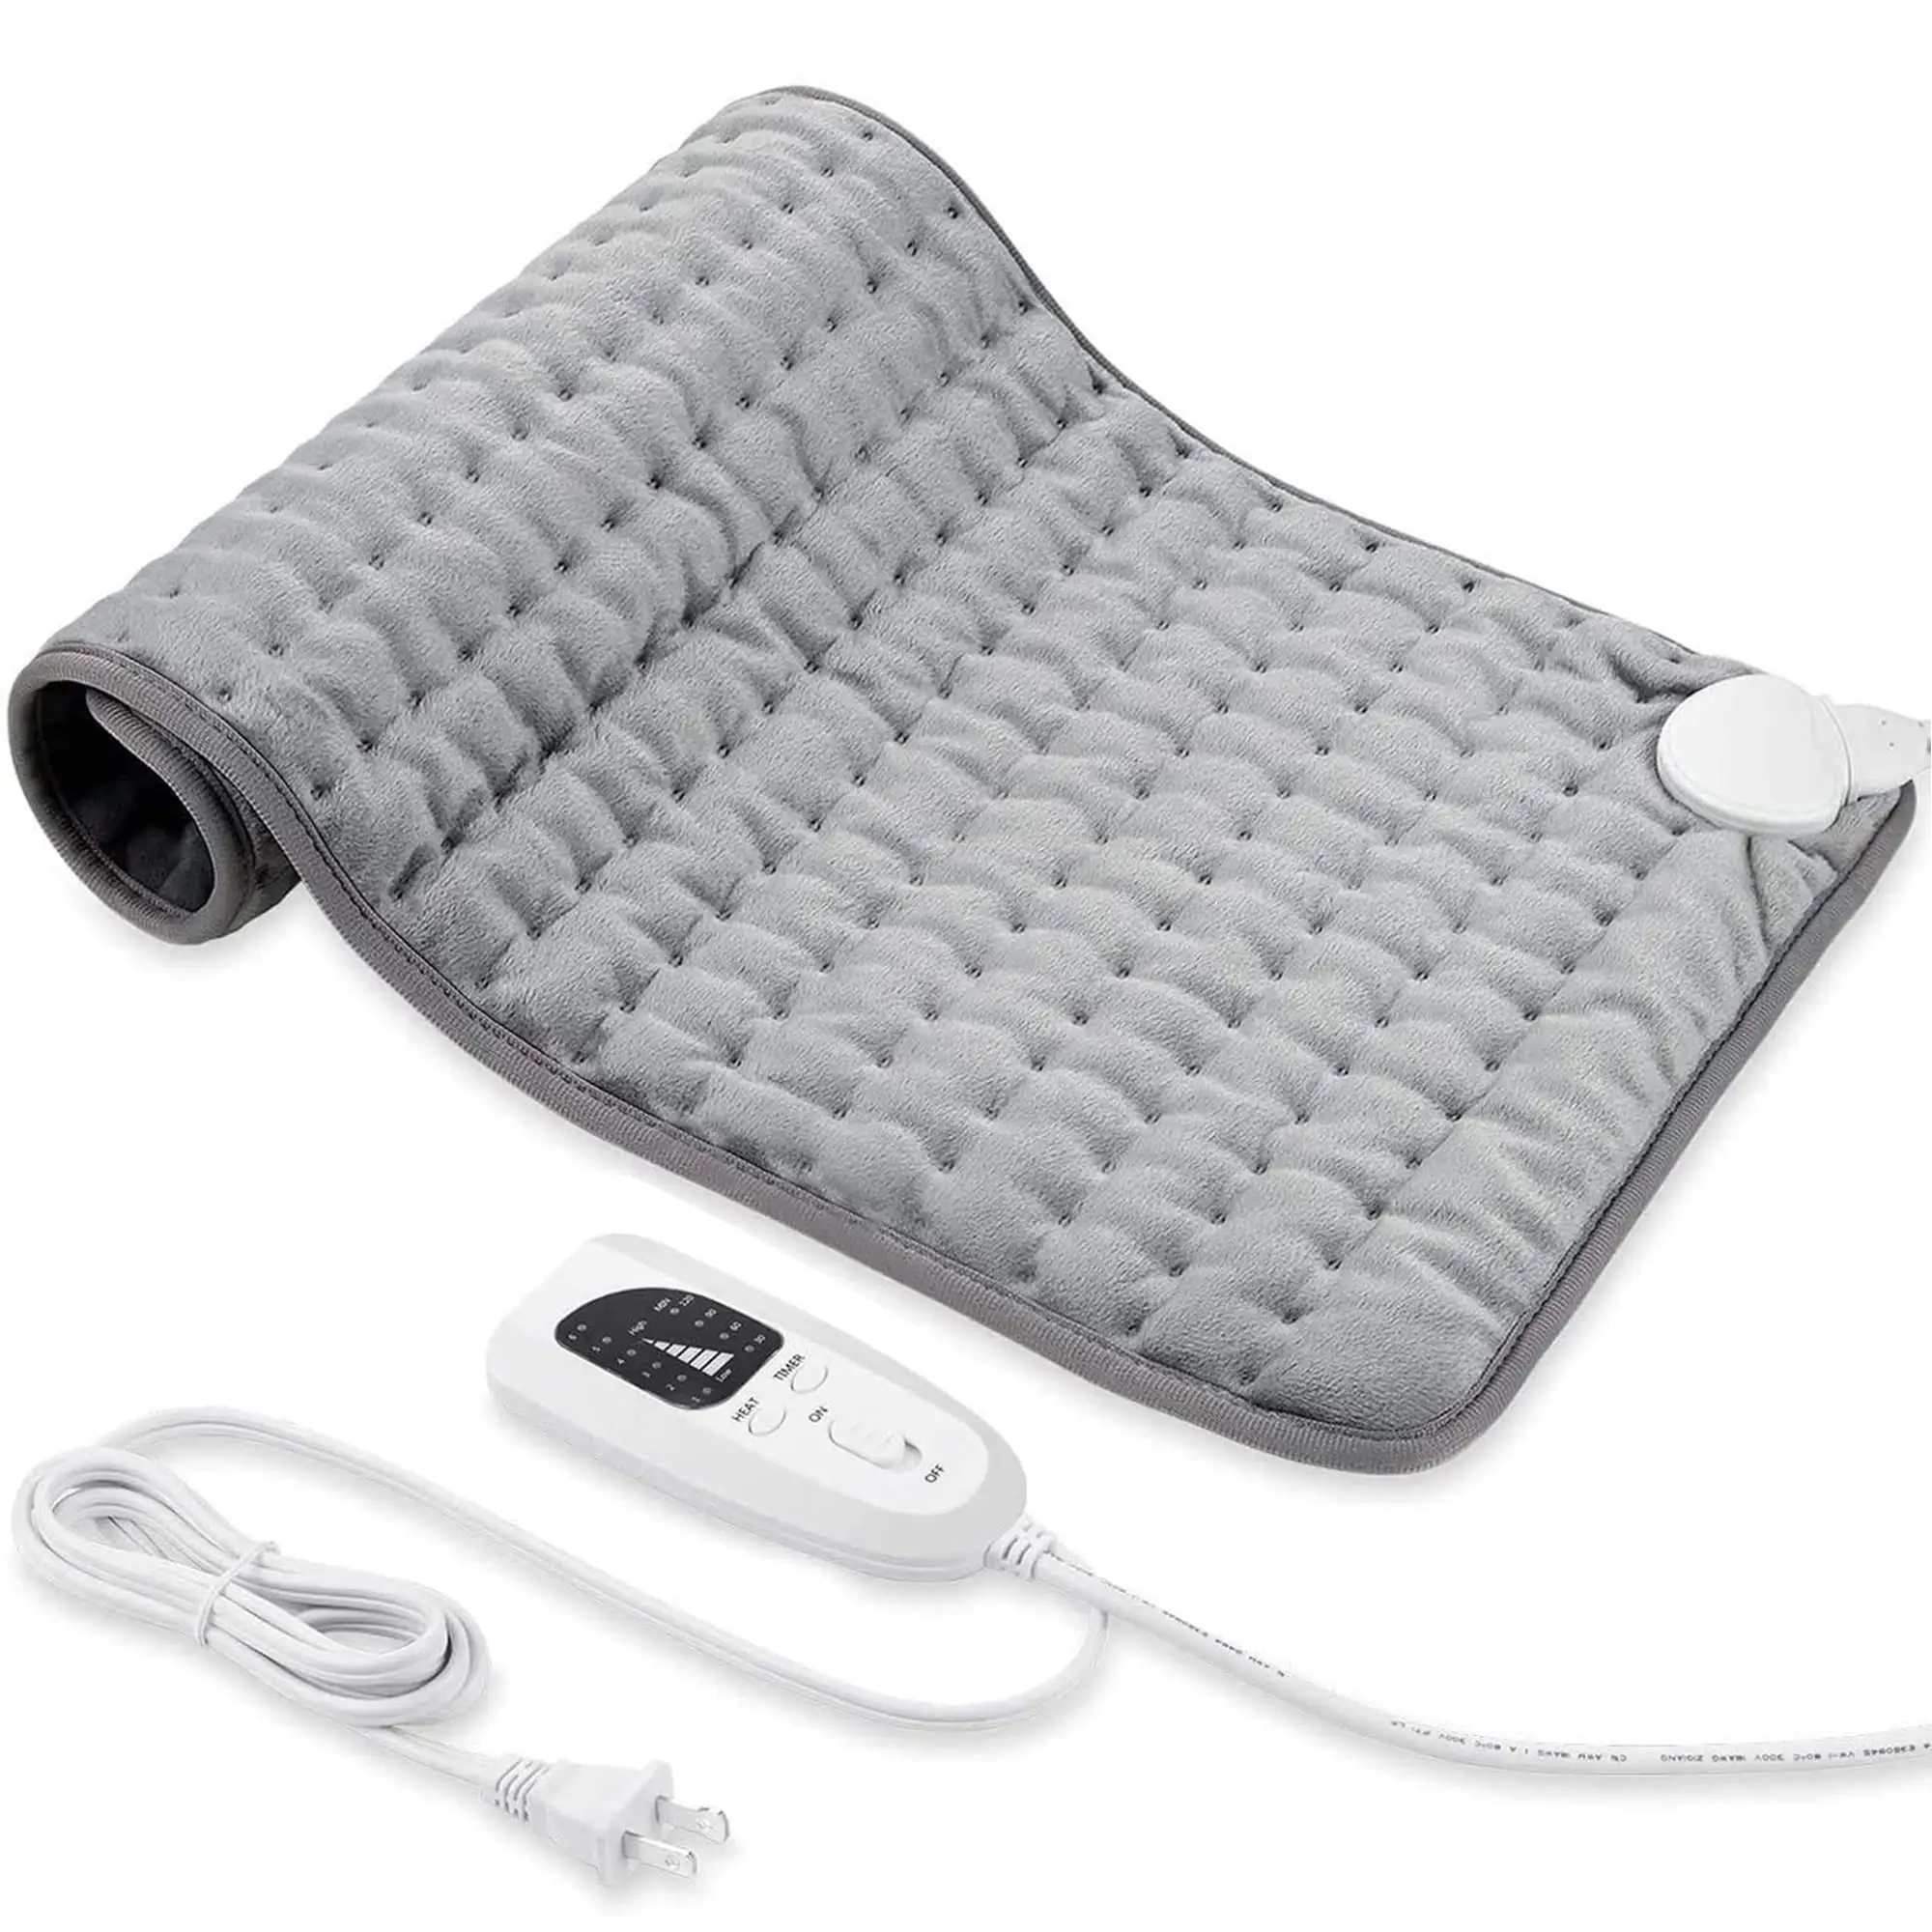 Electric Heating 60x30cm 6 Heat Settings Heating Pad for Back Neck Shoulder Pain Relief